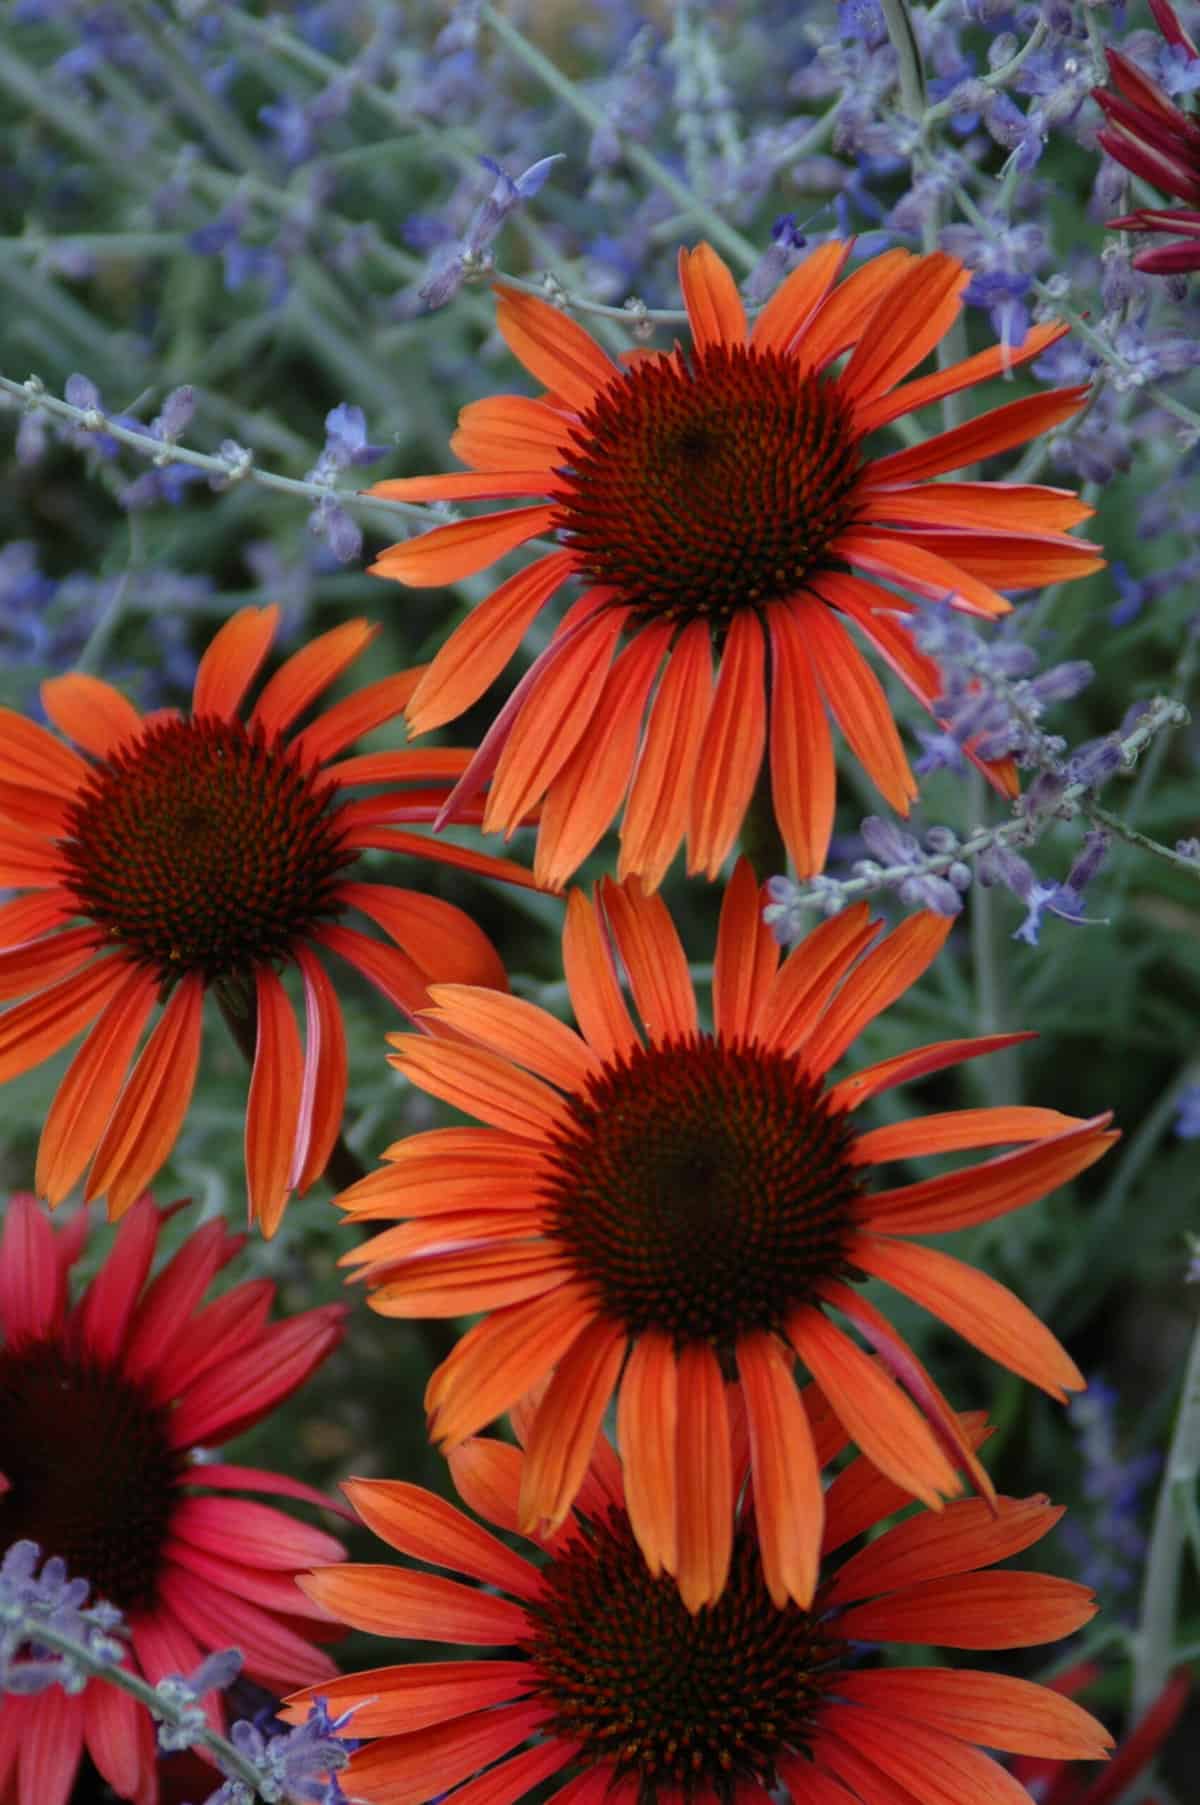 Vibrant orange coneflowers surrounded by delicate purple blooms.